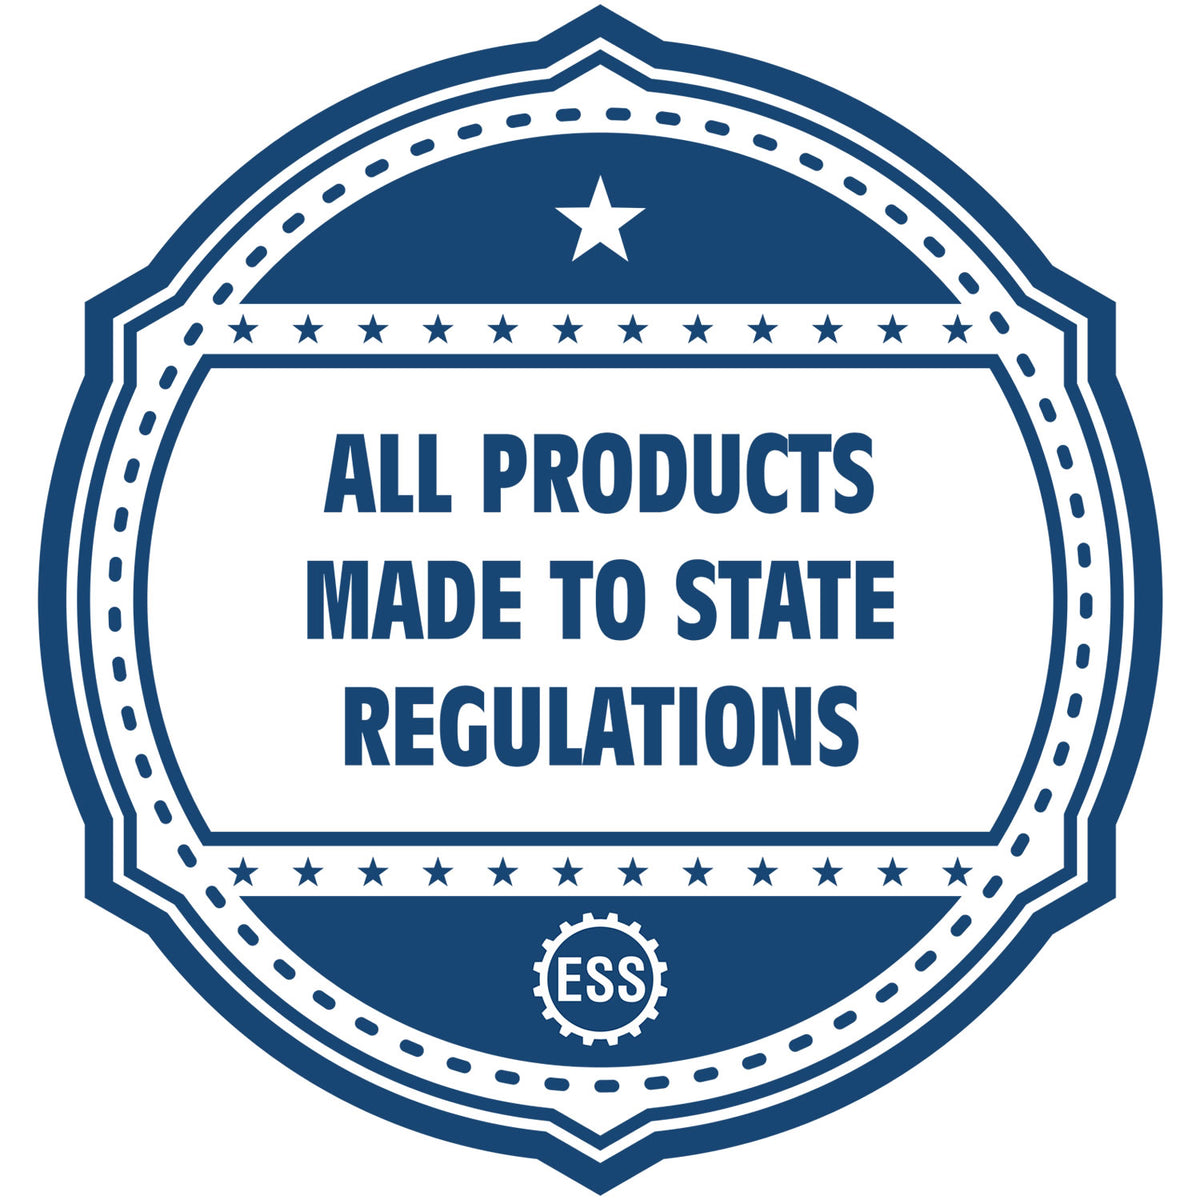 An icon or badge element for the Long Reach New Hampshire PE Seal showing that this product is made in compliance with state regulations.